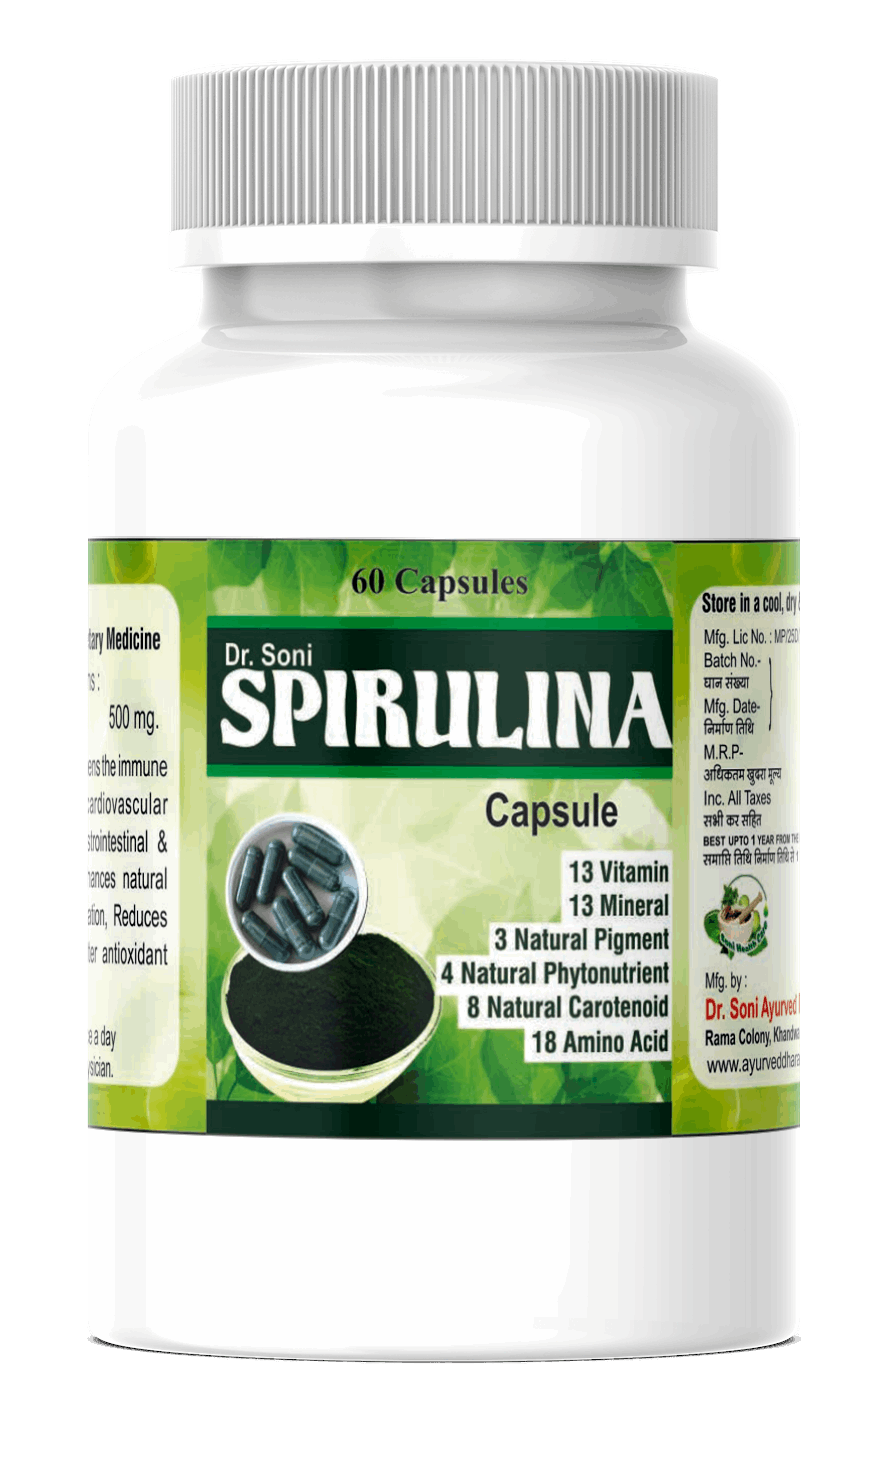 Helps In Healthy Heart Capsules (60 Capsule),Weight Management Vitamin A Triglyceride Reduce blood pressure Protein Potassium Organic Spirulina Capsules Nutrients and vitamins natural ways to boost immunity LDL Immunity Booster Green Food Calcium Boost immunity Antioxidants Anti-inflammatory Anti-cancer